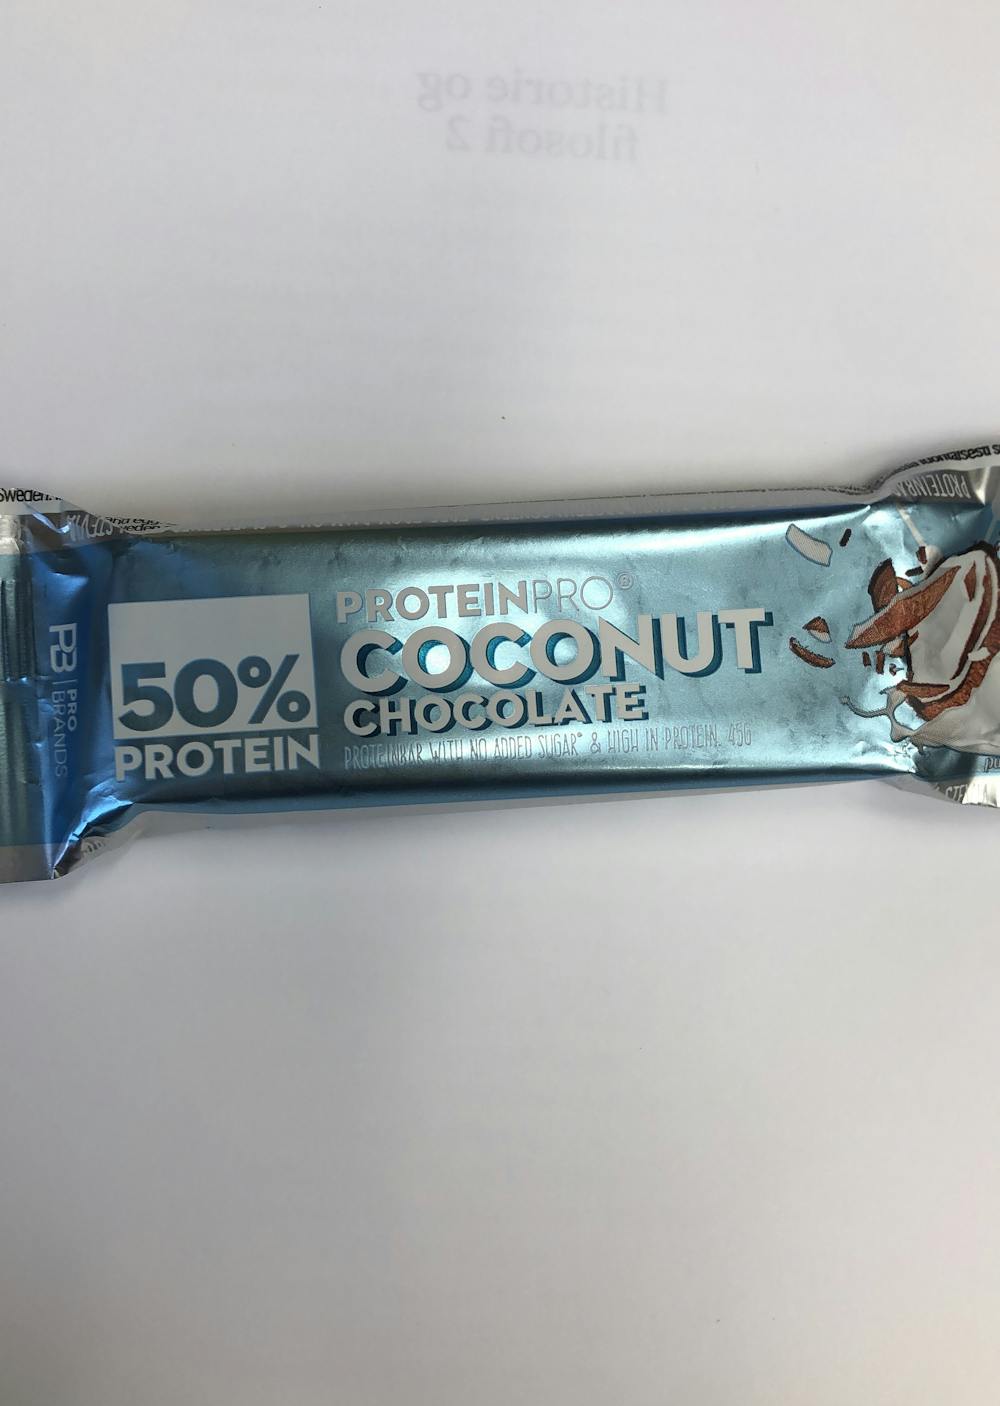 Coconut chocolate 50% protein, Protein pro